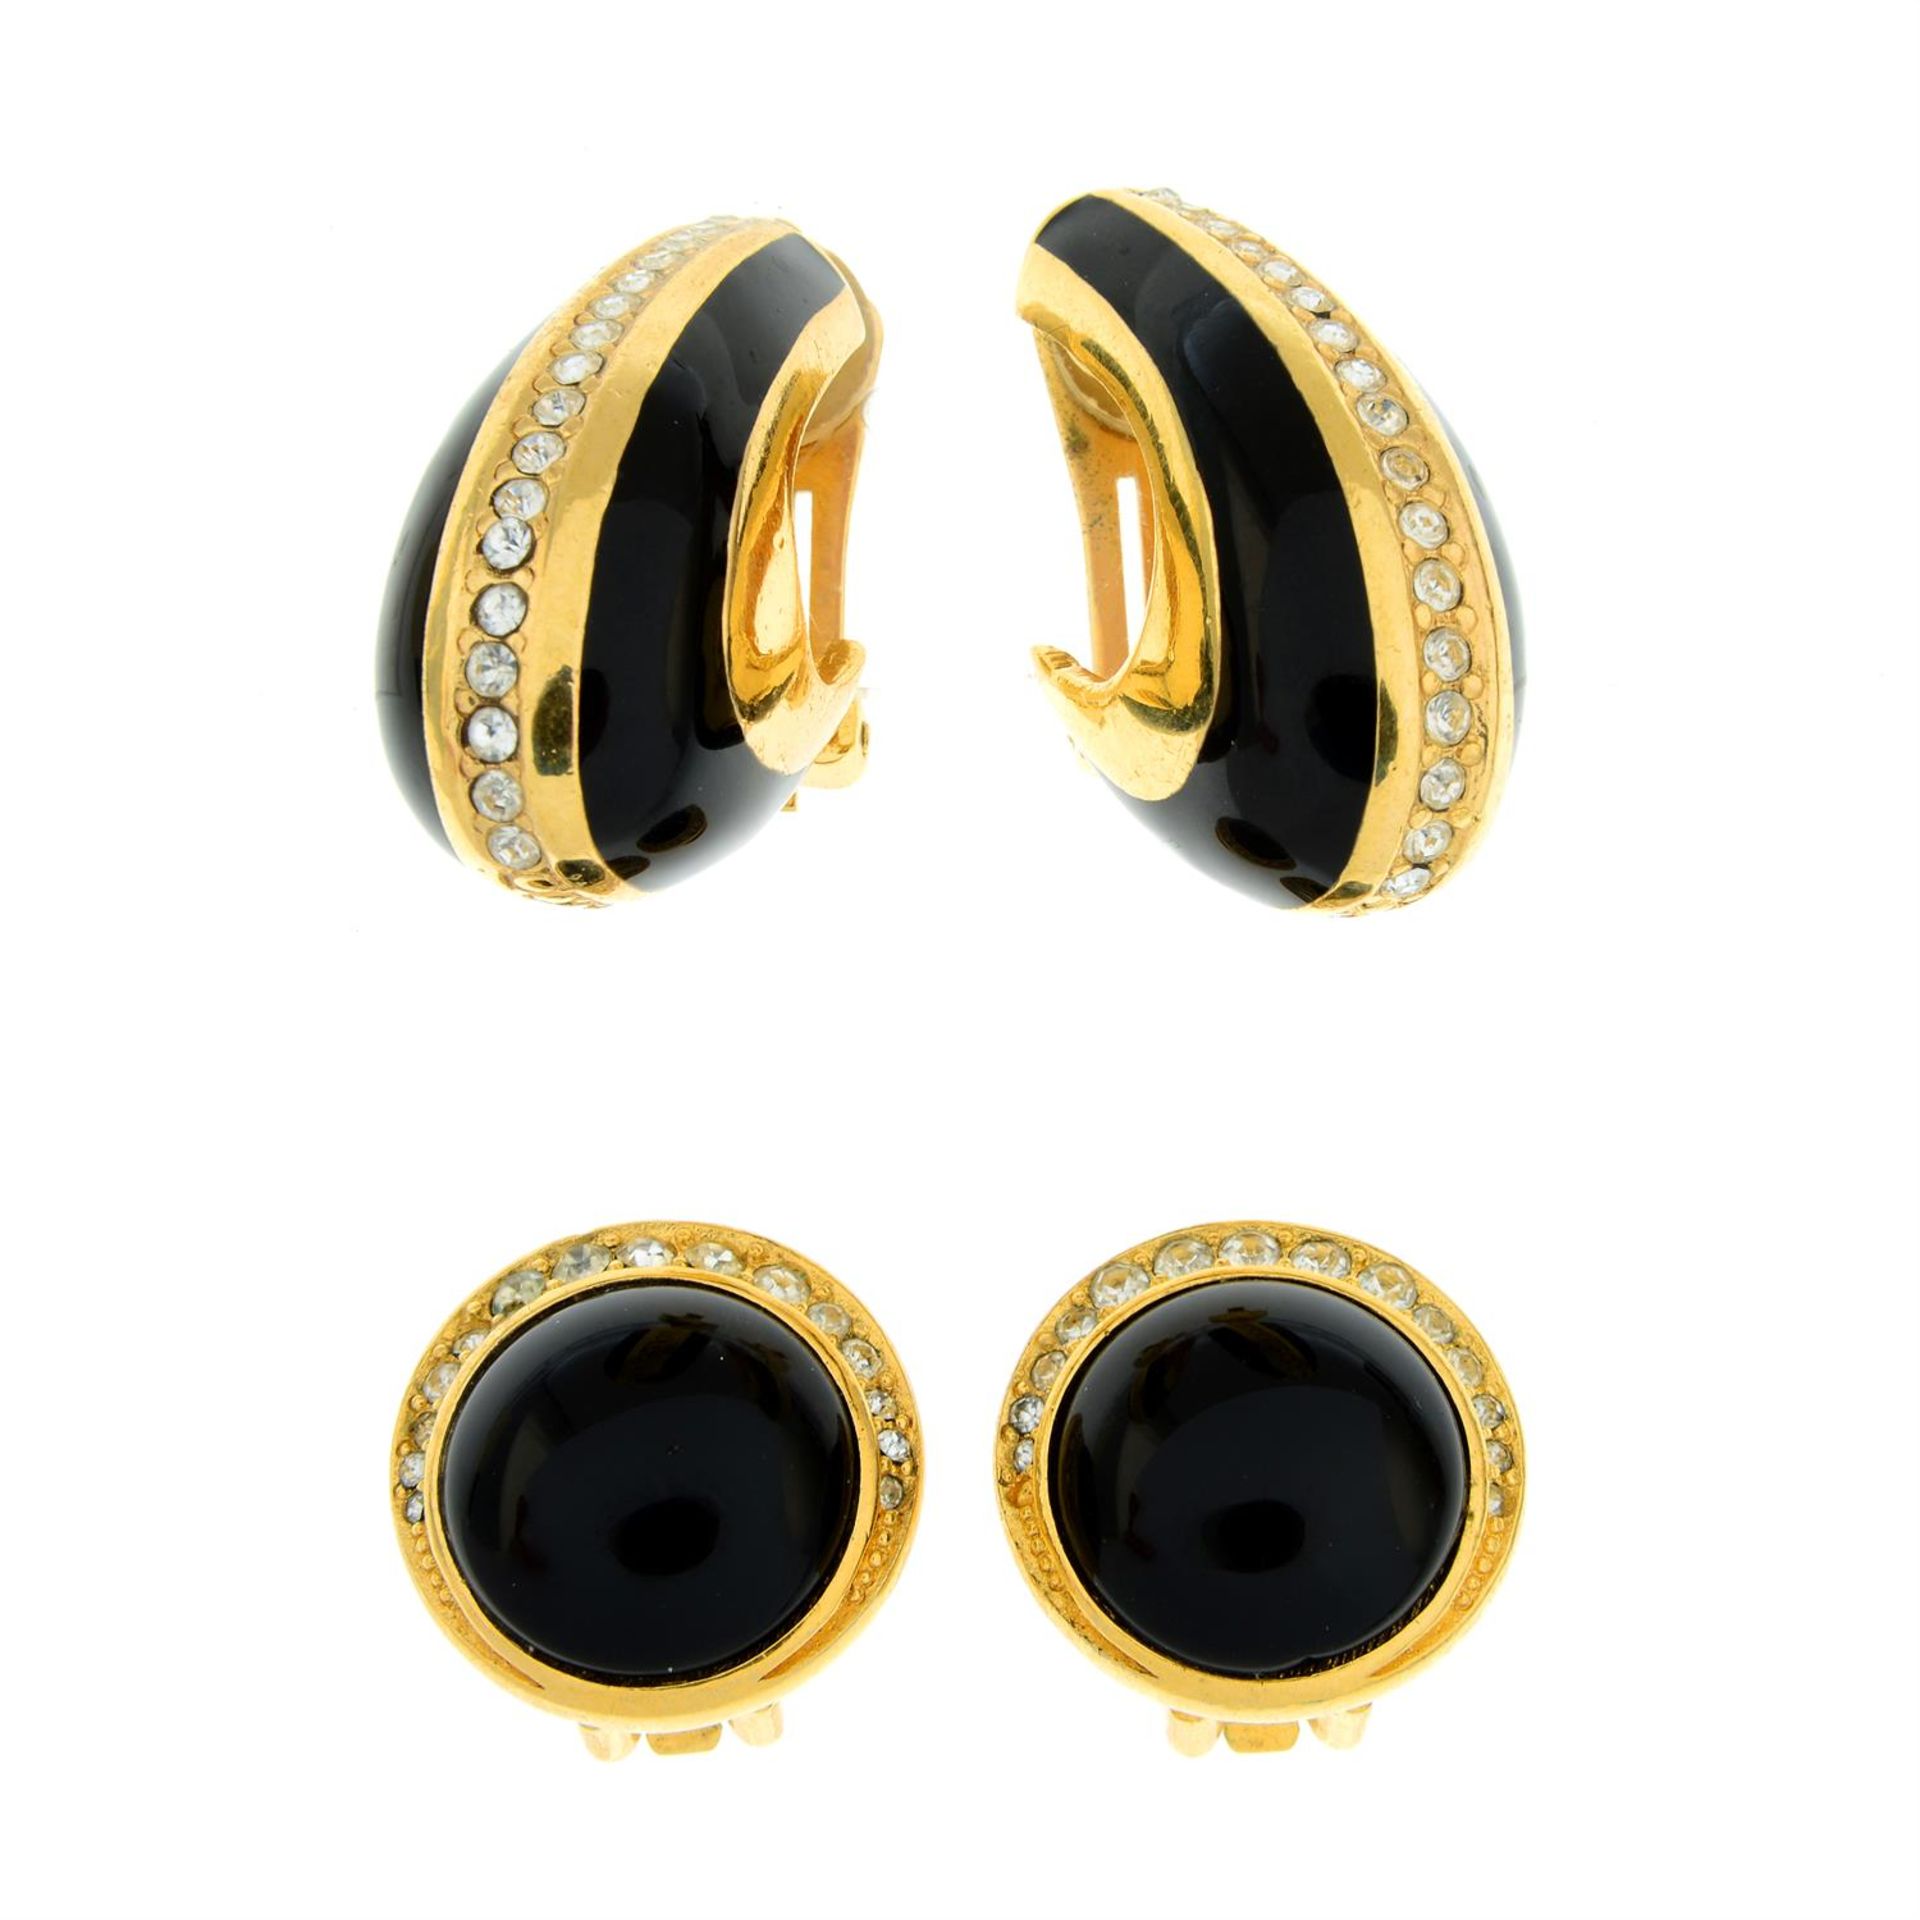 CHRISTIAN DIOR - two pairs of clear paste and black enamel clip-on earrings.